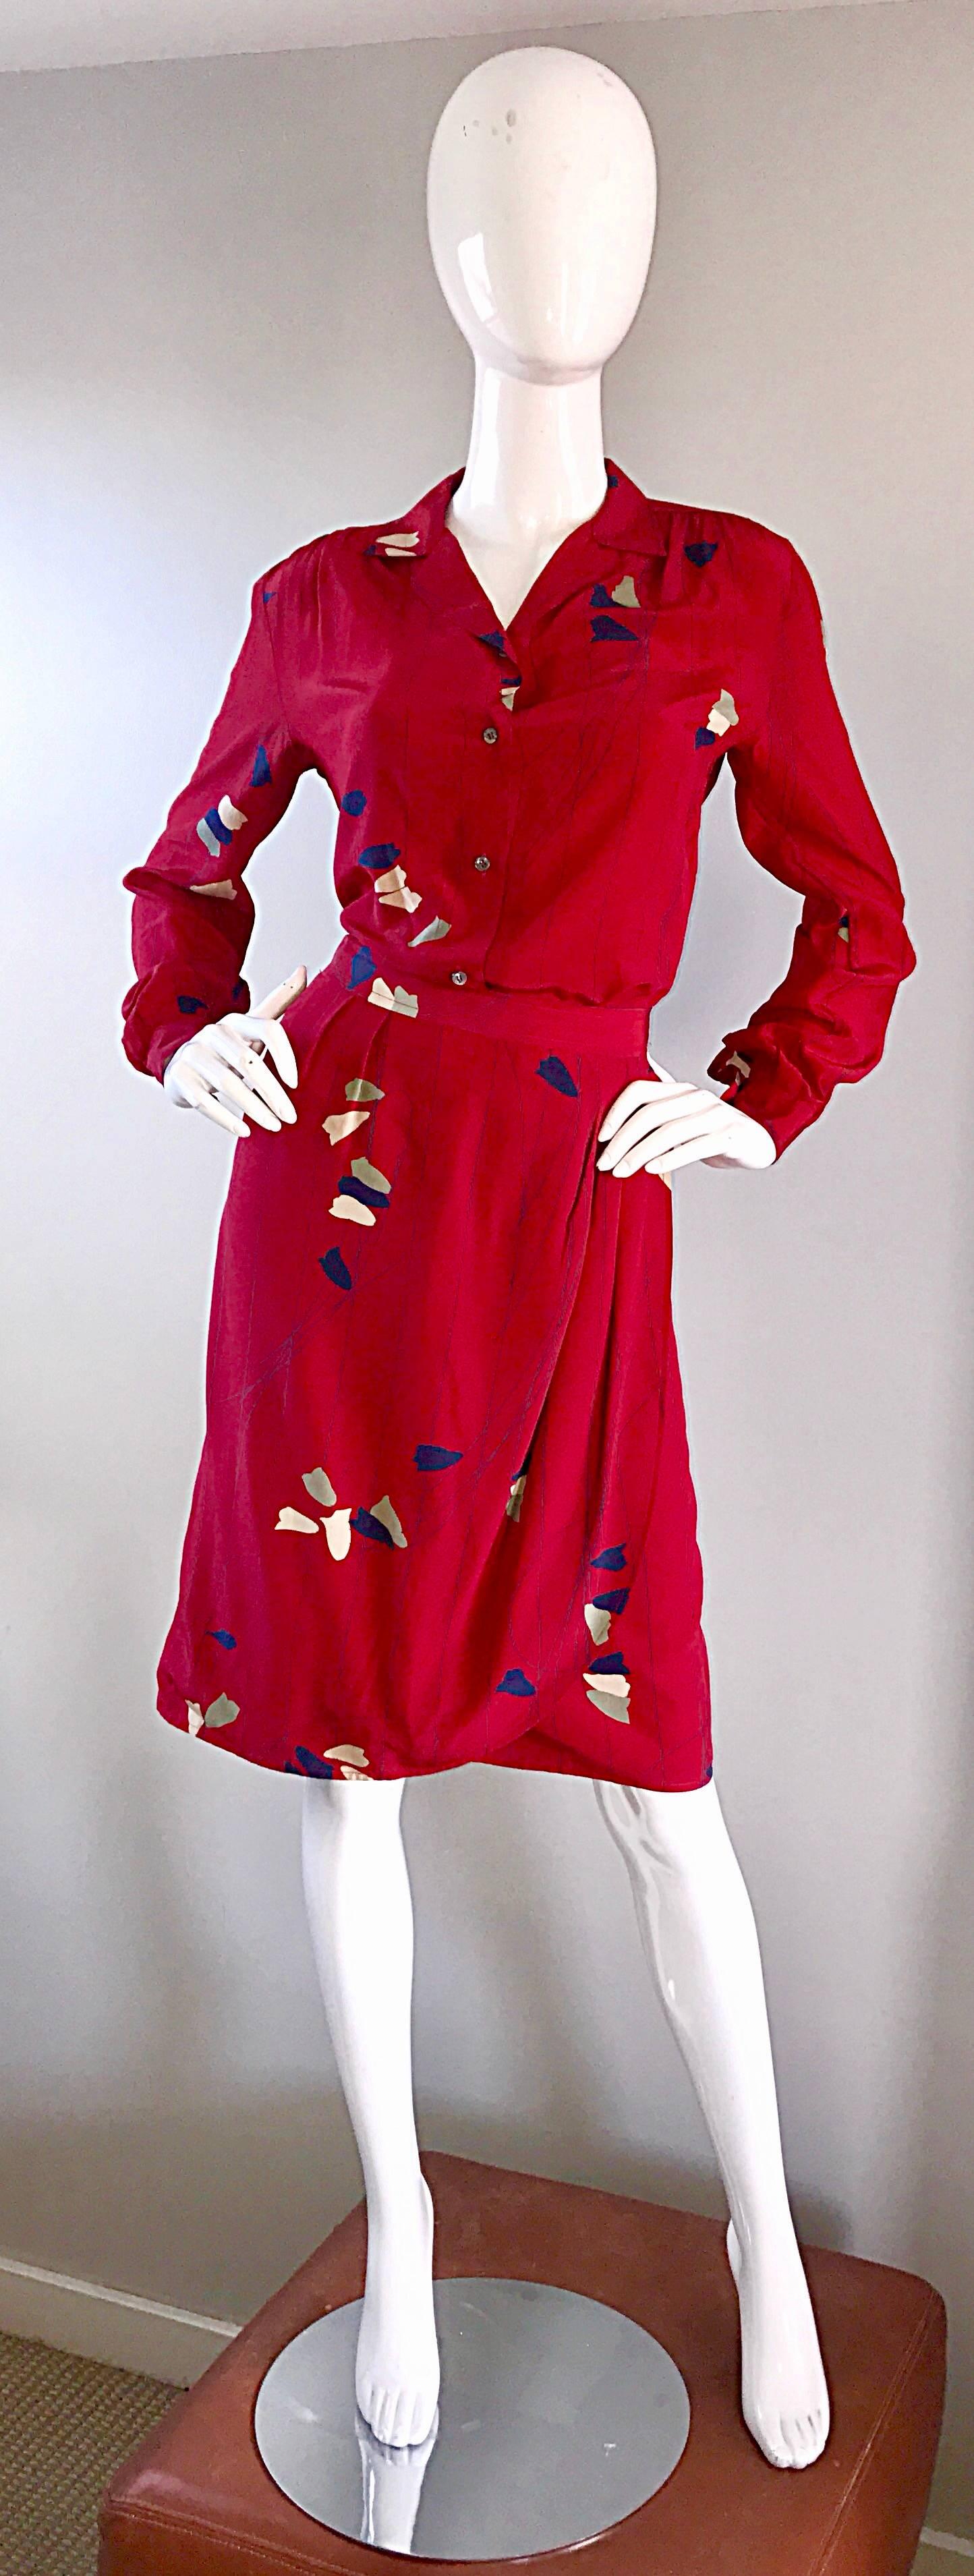 Beautiful and classic 1970s ALAN AUSTIN red silk blouse and skirt set! Luxurious bright red silk, with a chartreuse green, blue, and ivory foliage print throughout. Skirt drapes beautifully, with a wrap-like style. Blouse buttons up the bodice, with